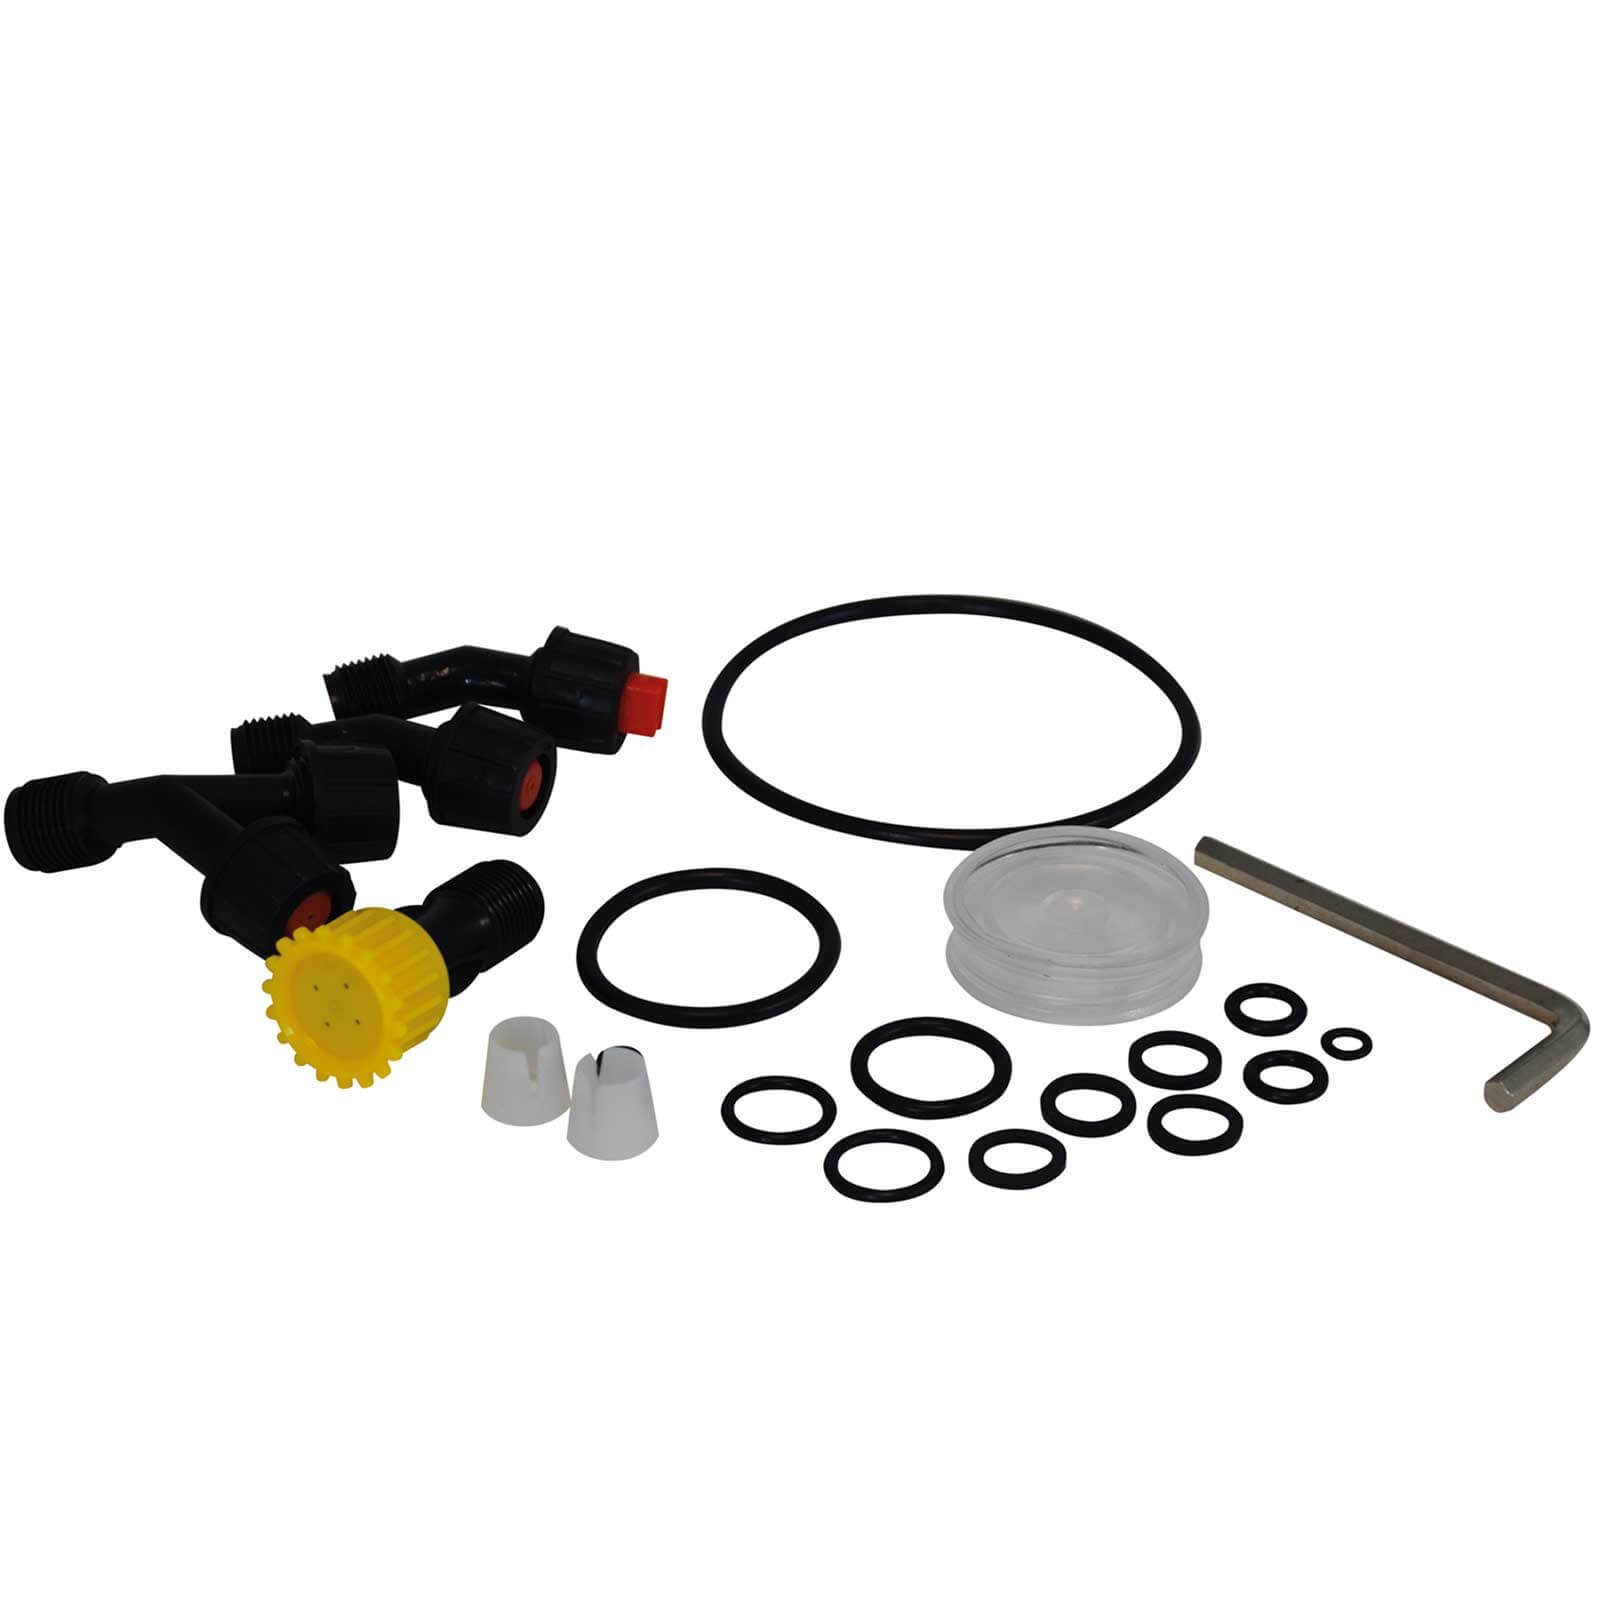 Image of Spear and Jackson Replacement Parts Set for 15l Backpack Sprayer